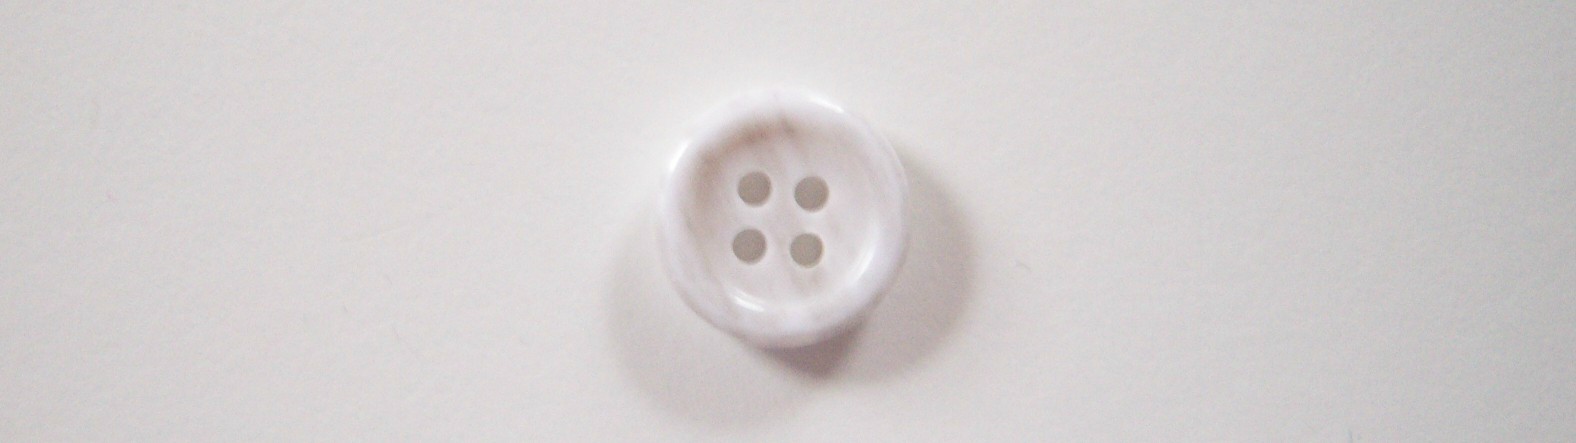 White/Pale Grey Marbled 5/8" Poly 4 Hole Button